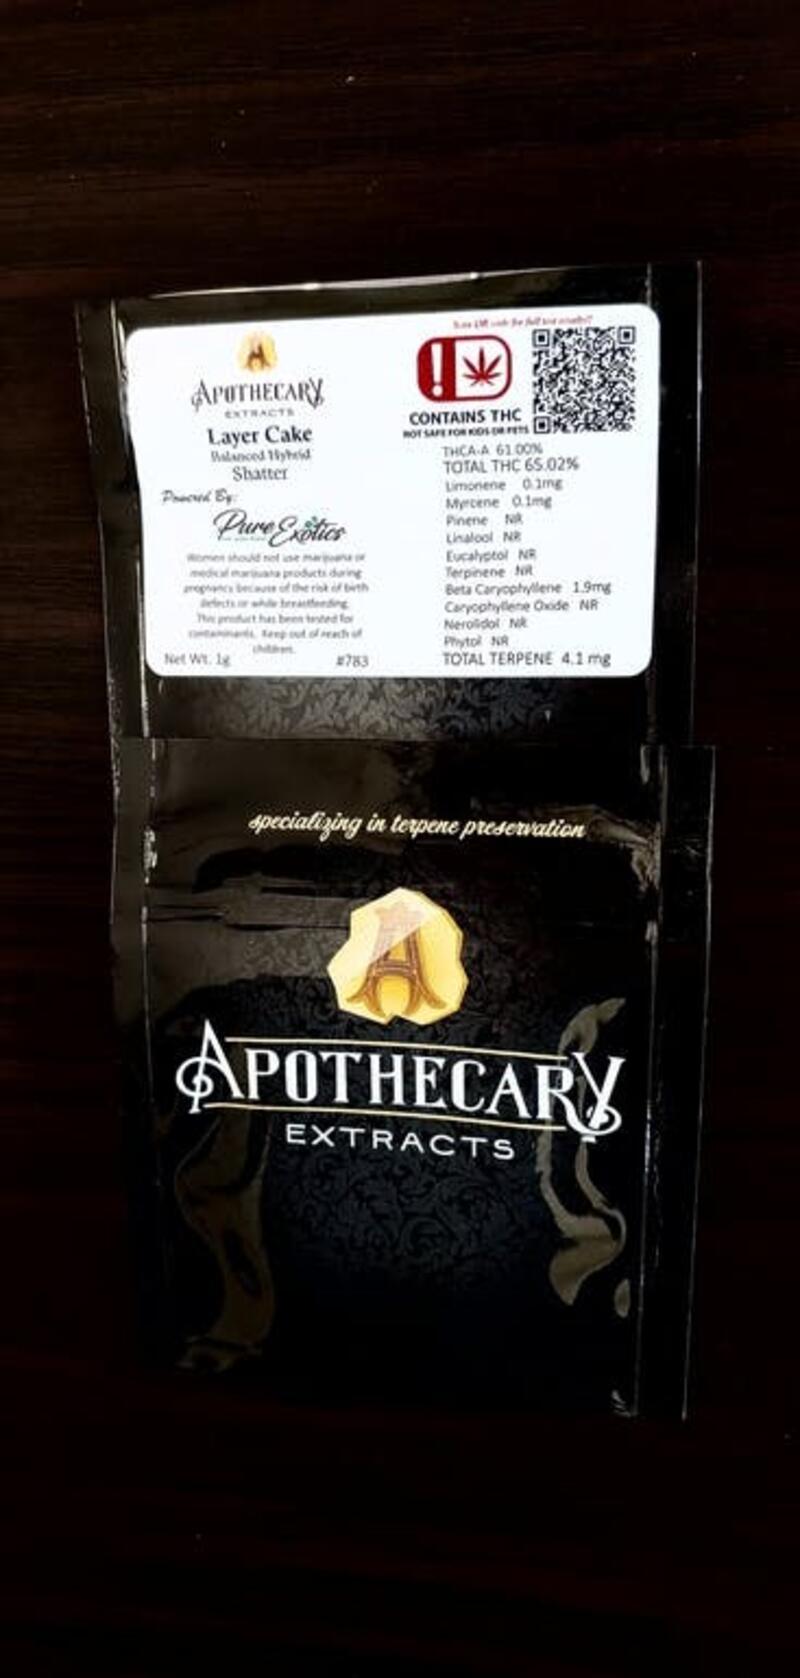 Apothecary Extracts - Layer Cake 1g Shatter